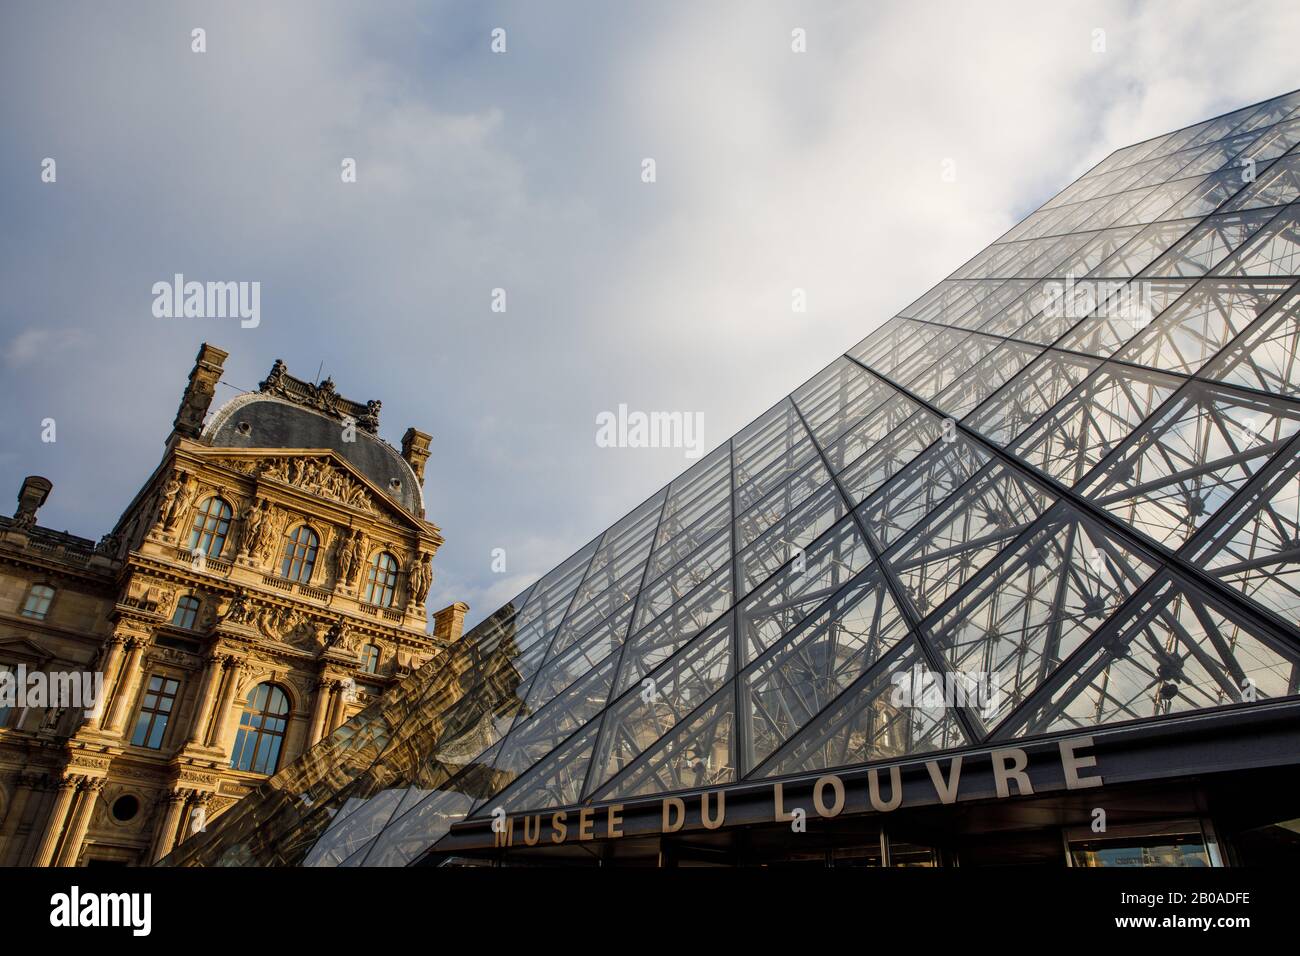 The famous glass pyramids at the entrance to the Louvre in Paris. Stock Photo